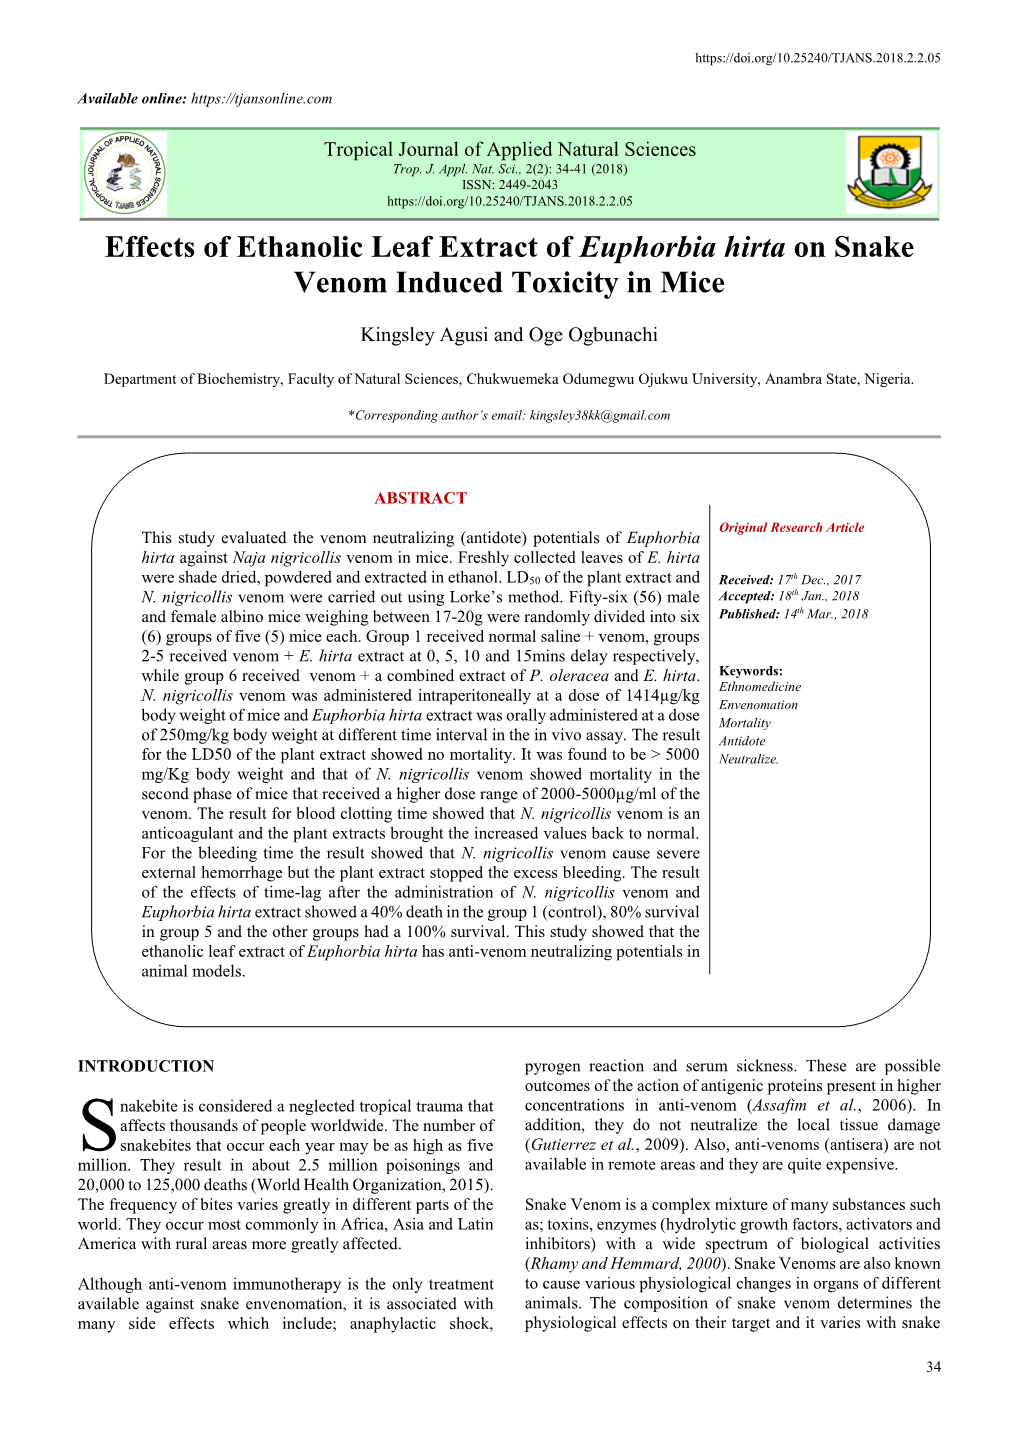 Effects of Ethanolic Leaf Extract of Euphorbia Hirta on Snake Venom Induced Toxicity in Mice